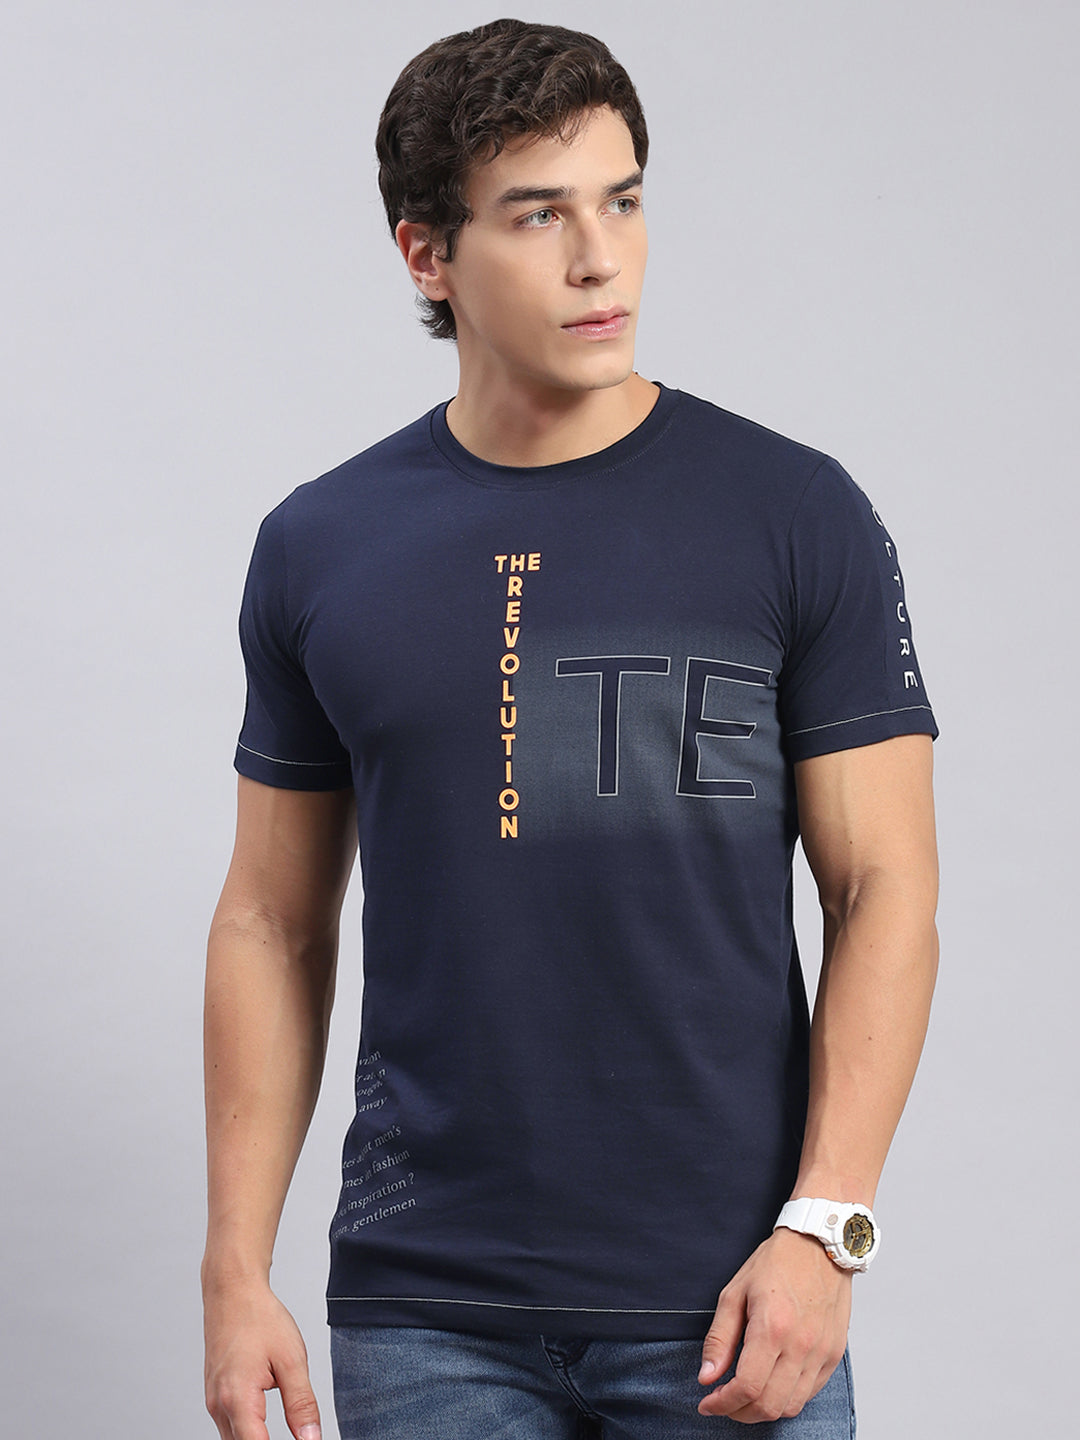 Half Sleeves Mens House Turtle Printed T-Shirt, Size : XL, Occasion :  Casual Wear at Best Price in Noida